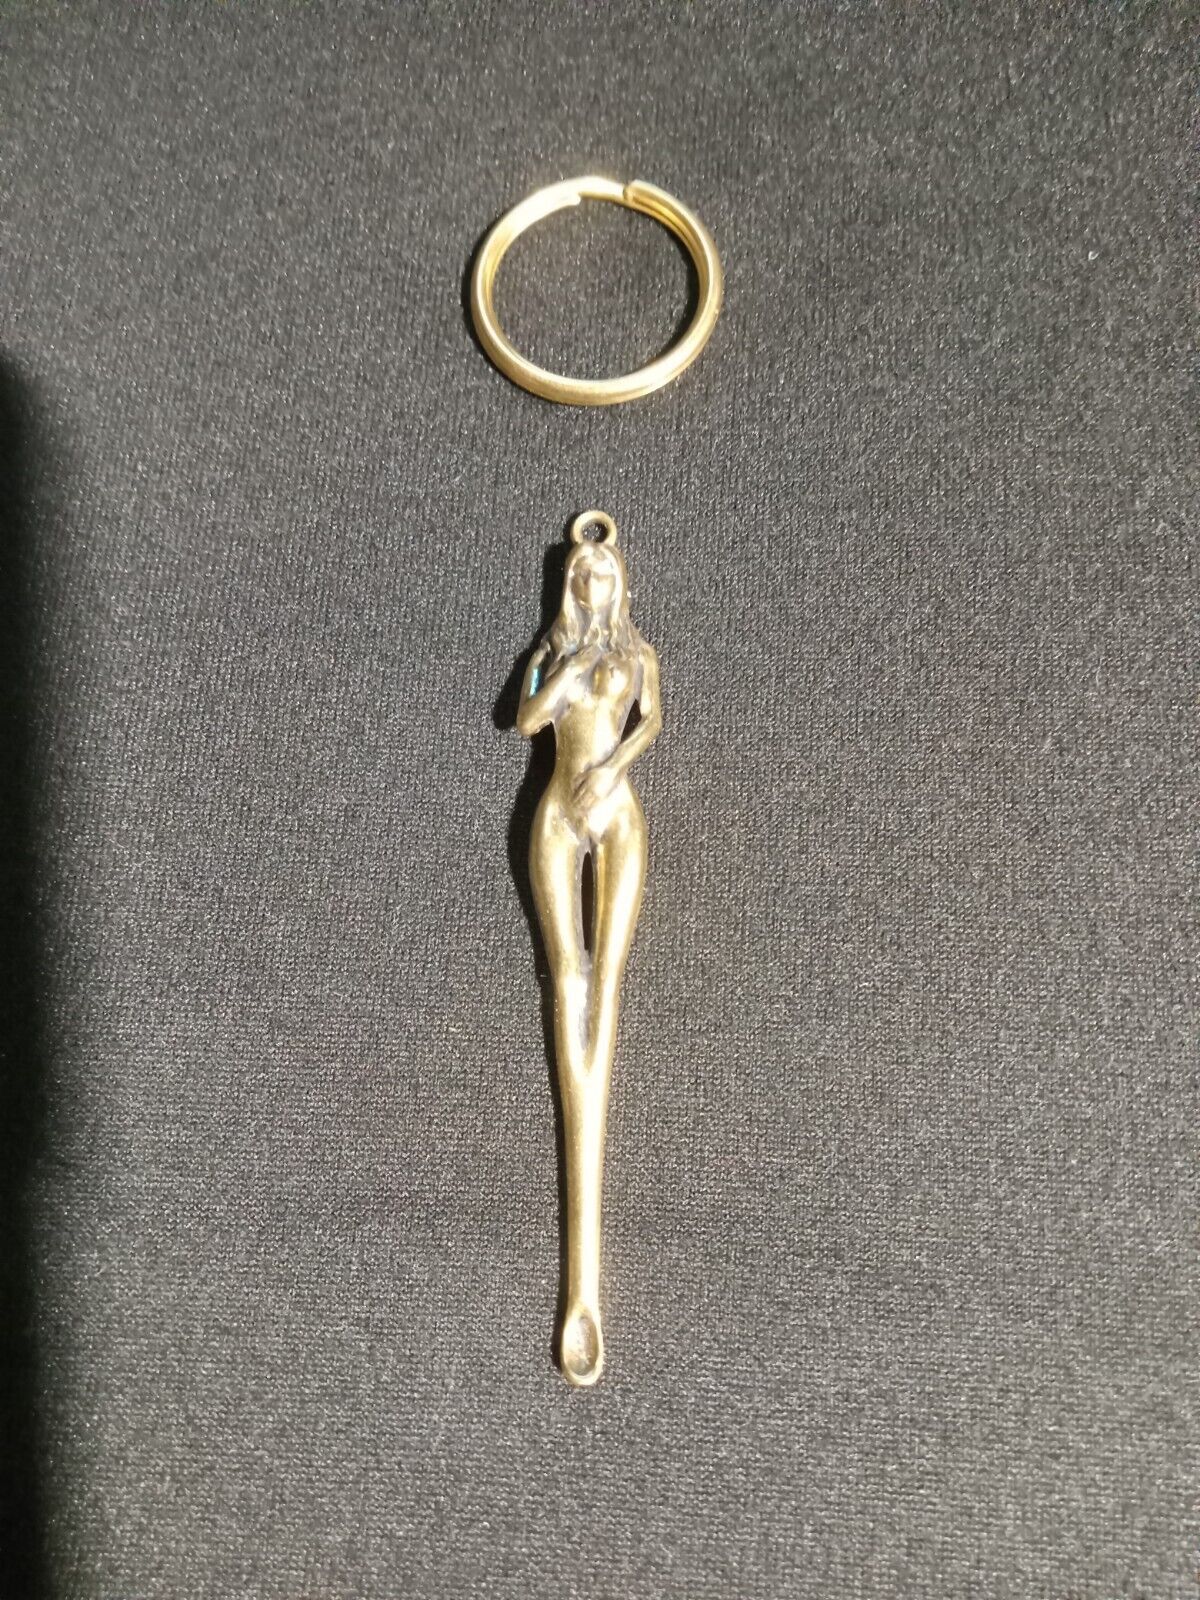 Naked Lady Harley Keychain Ring ☆Price Drop☆